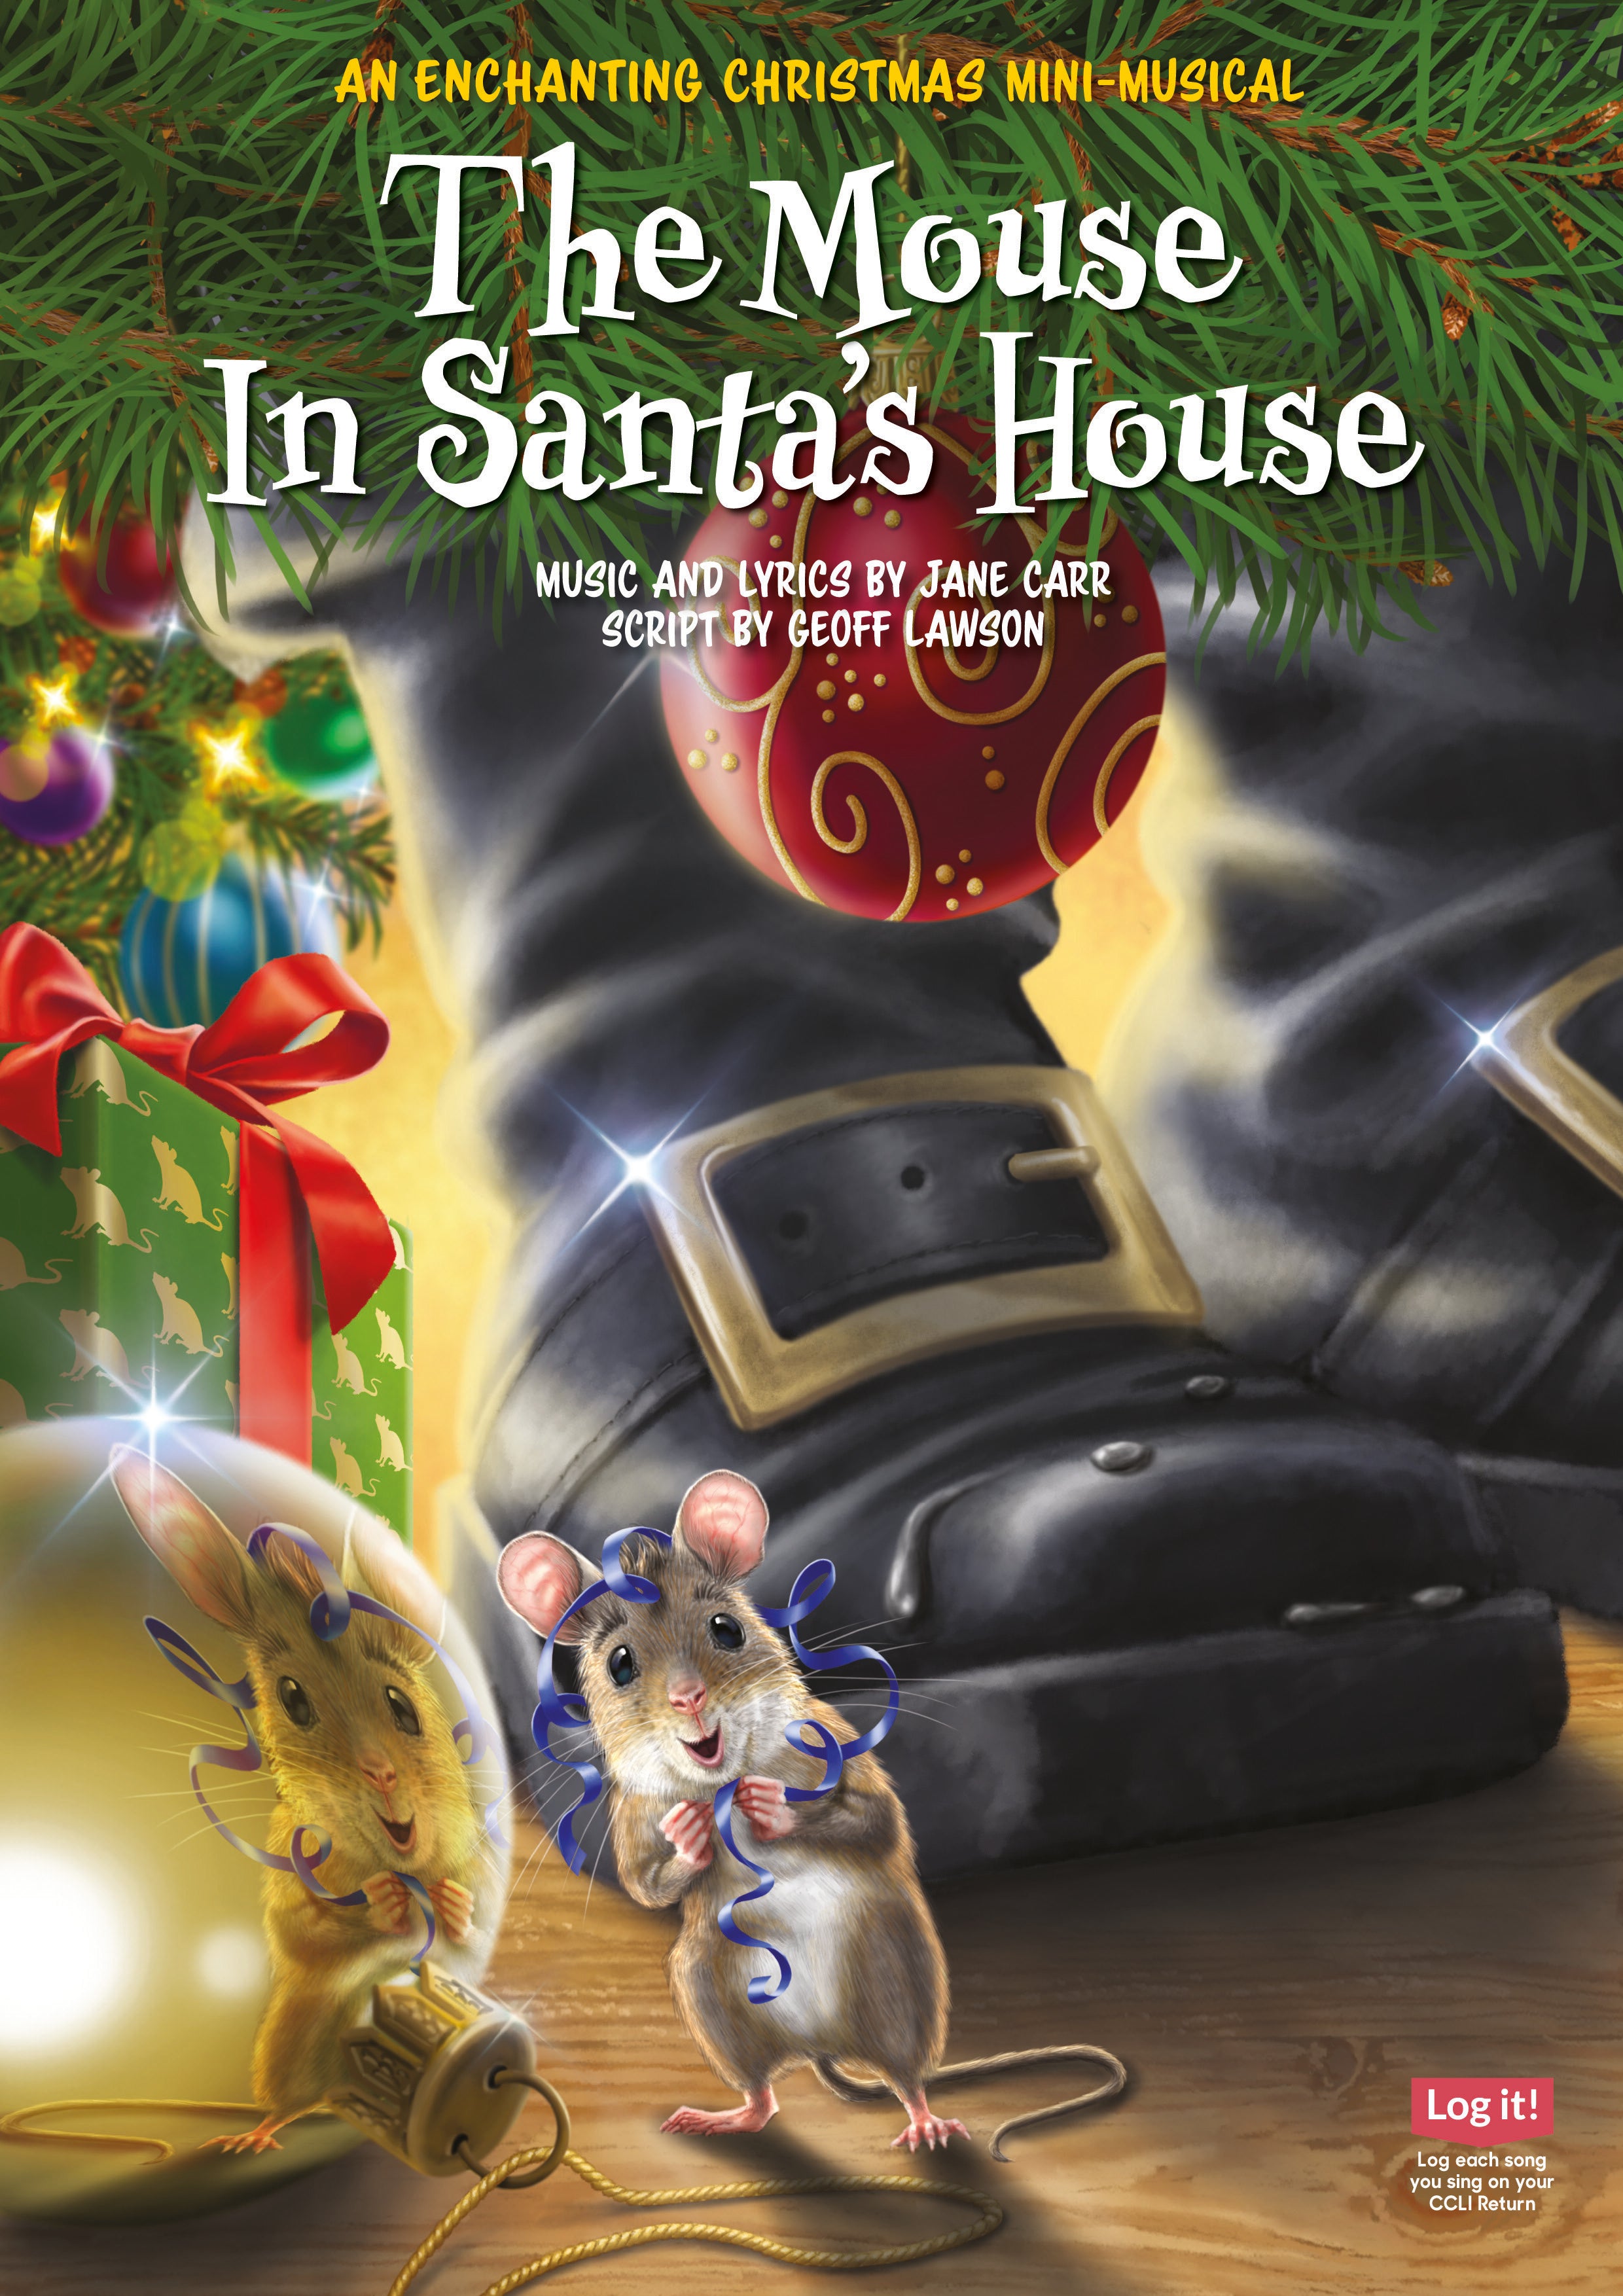 The Mouse In Santa's House